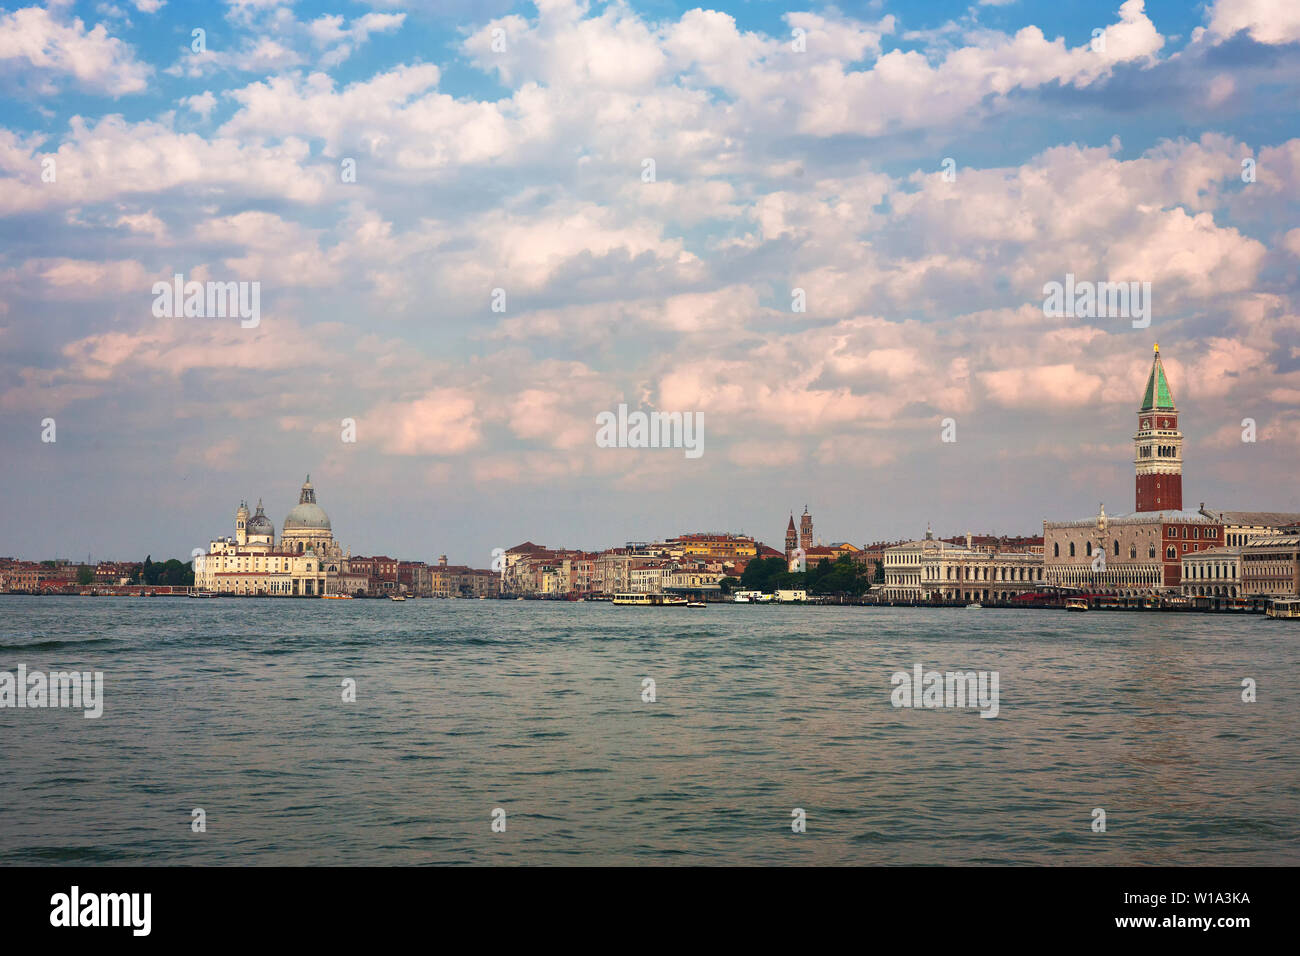 The classic approach to Venice by sea: the Bacino di San Marco, Venice, Italy Stock Photo